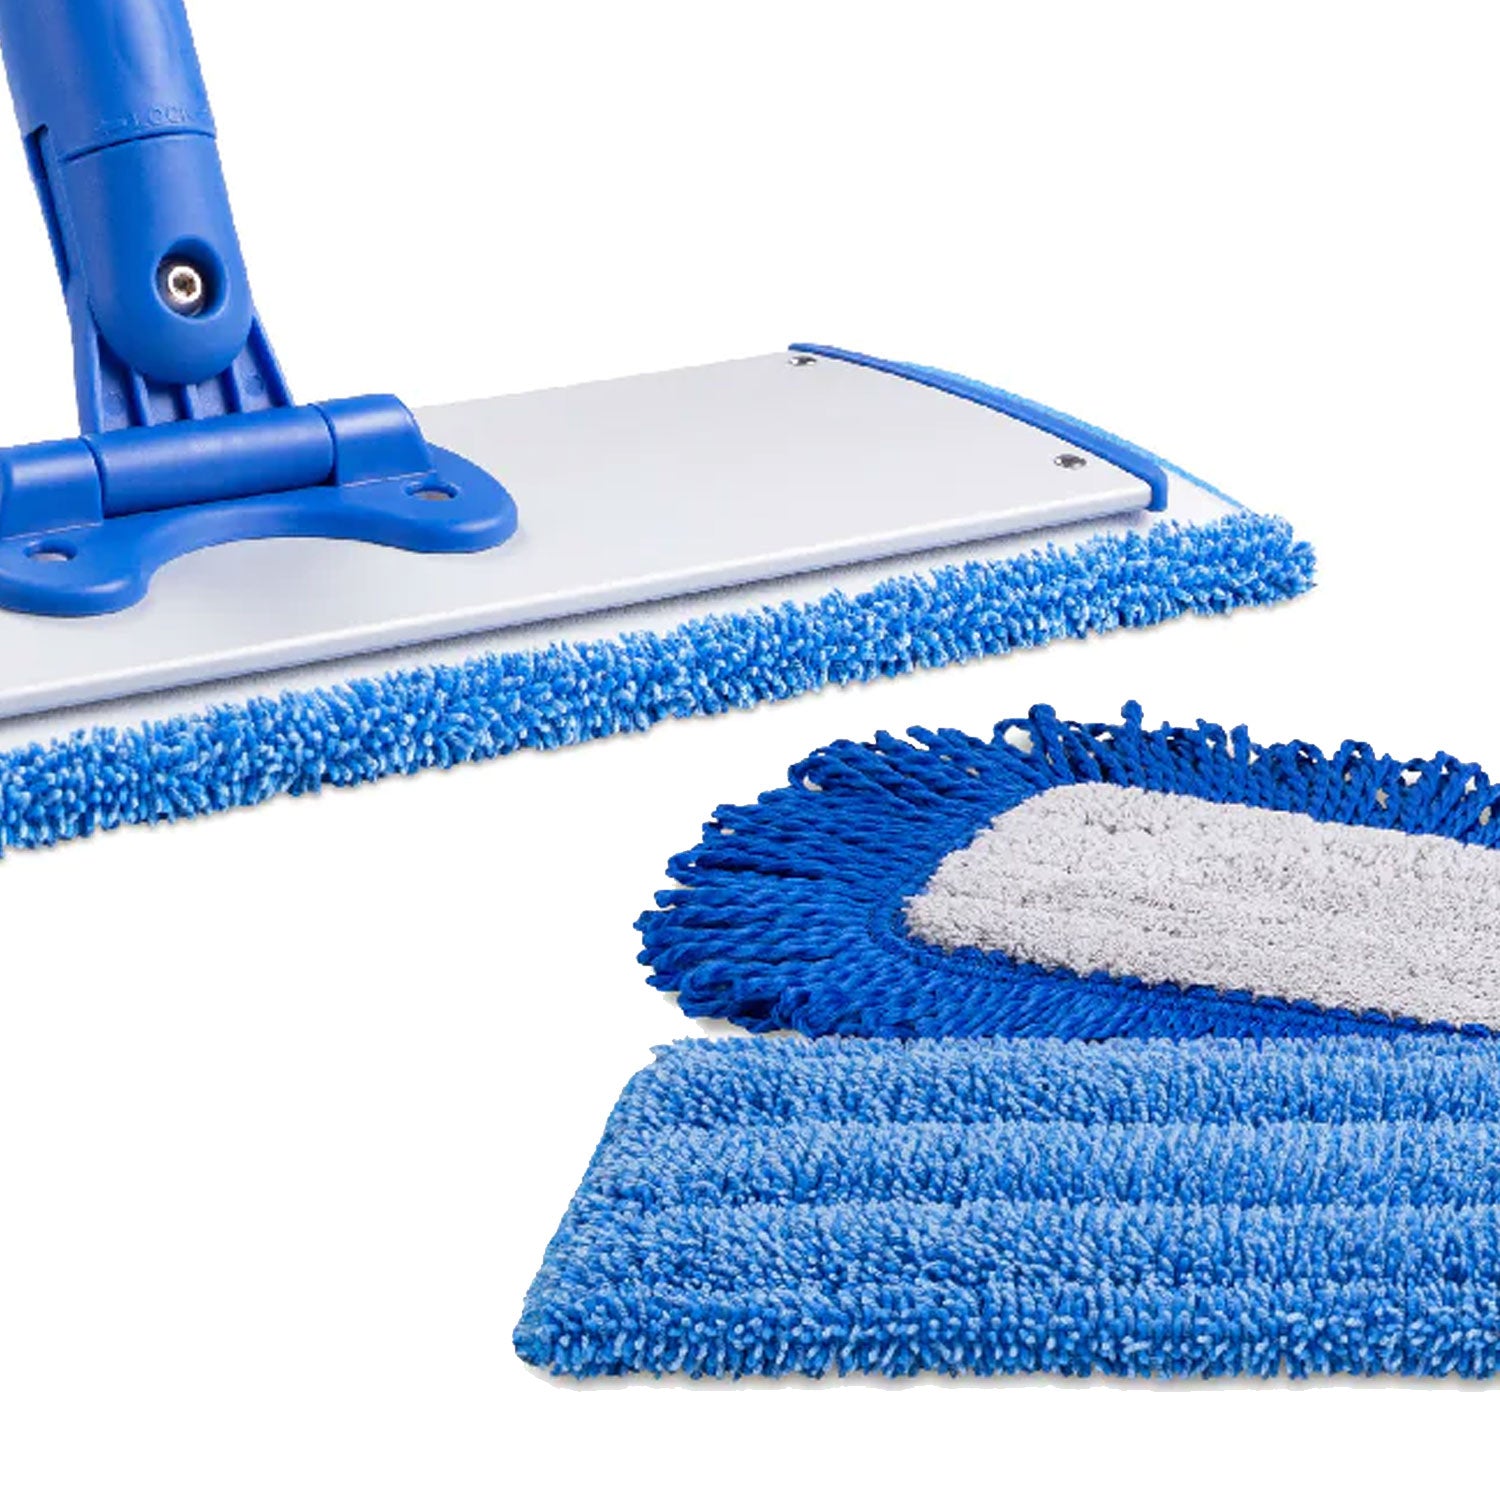  18 Professional Microfiber Mop Floor Cleaning System